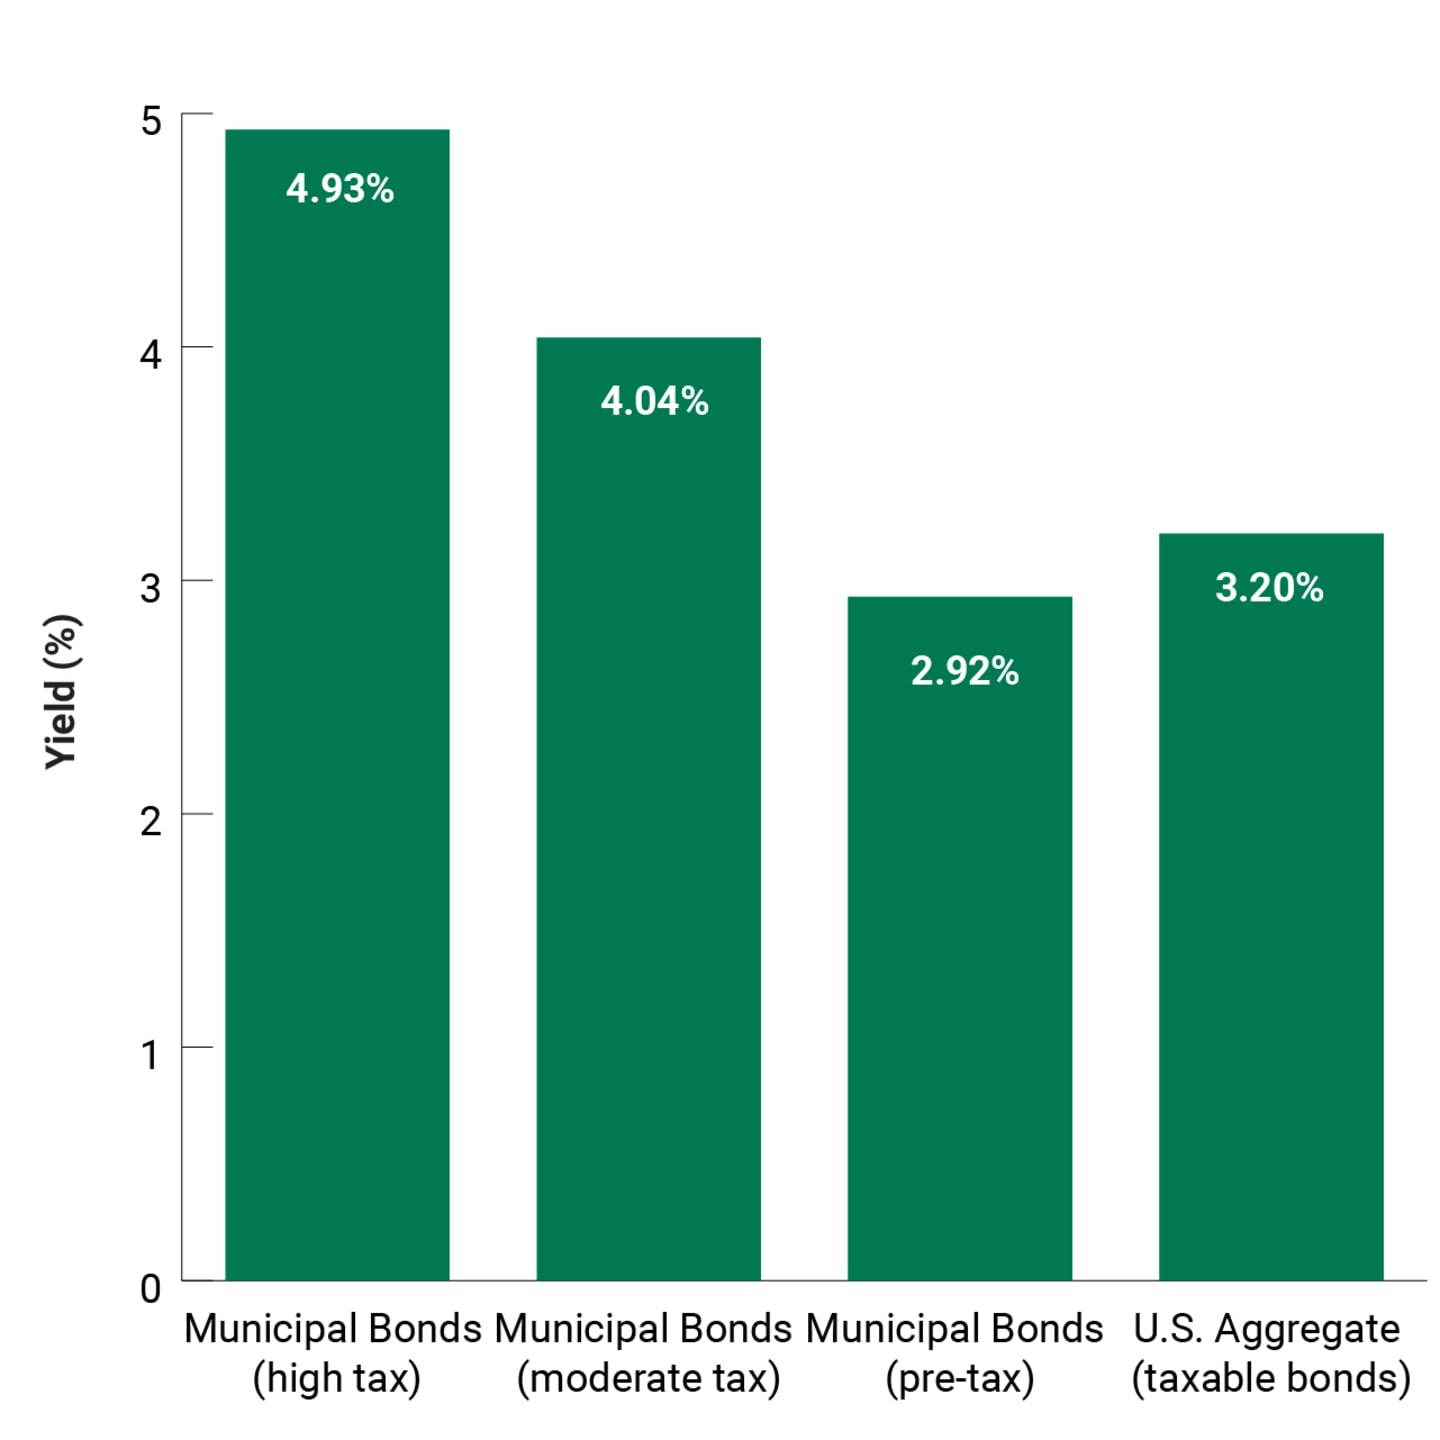 20-Year Average Yields for Municipal Bonds and U.S. Aggregate.